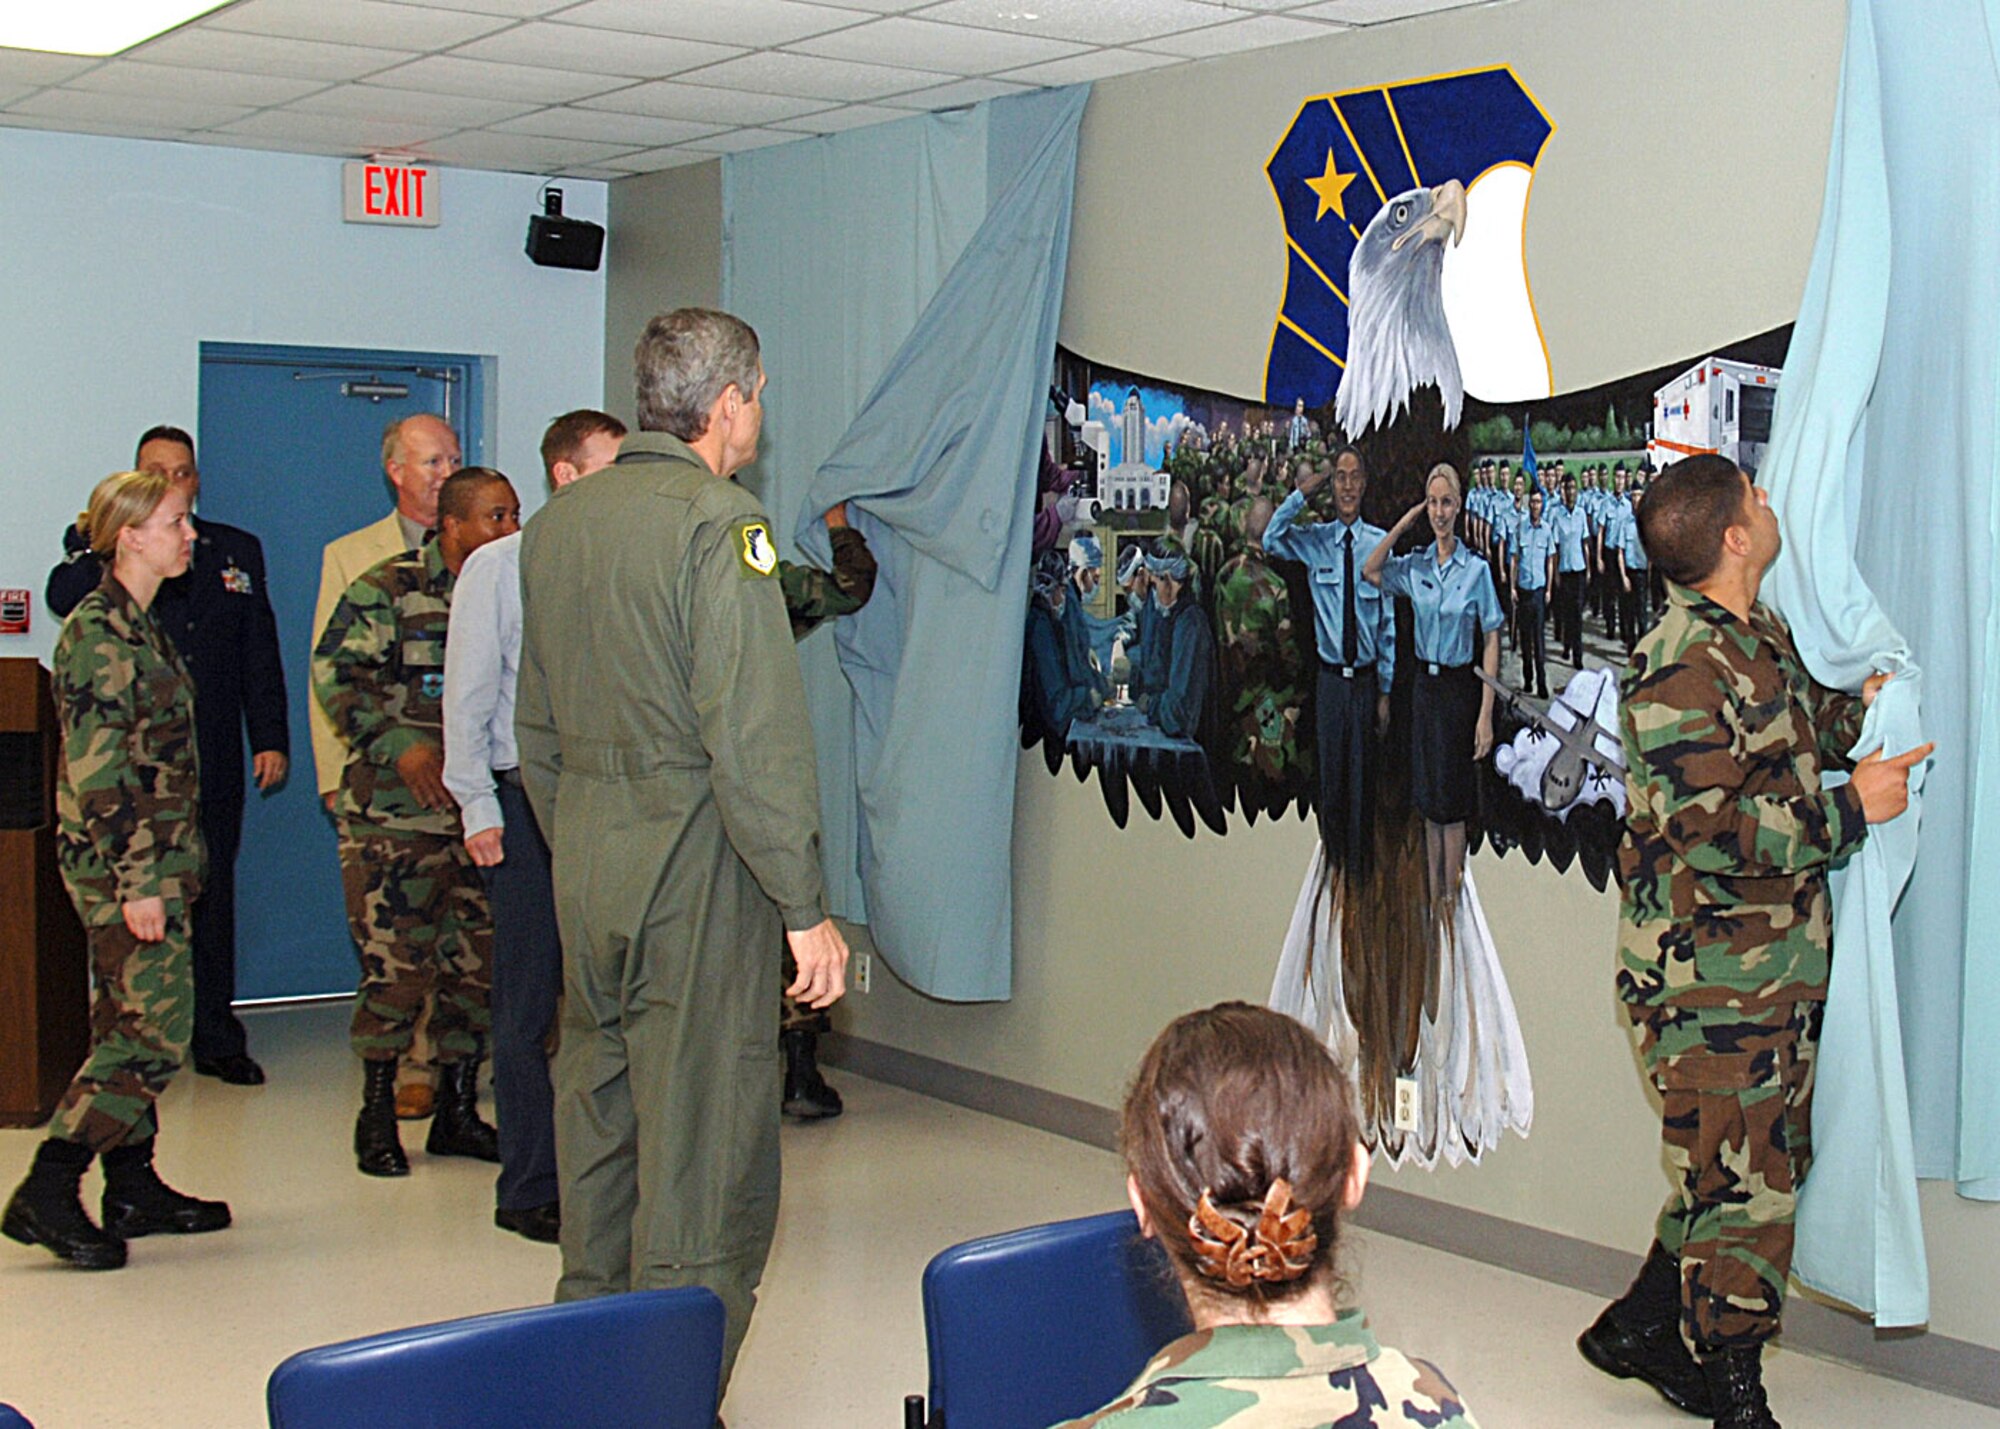 Security forces students, Airman Basics Adrien Quiles and Joseph Gussman unveil the finished Air Force Medical Service mural during a ceremony held April 24 at Camp Rissington on Lackland Air Force Base, Texas. The mural, created by artist Jacob Galey spans a 20-foot section of wall in the 59th Medical Wing Readiness Division's training classroom. It depicts the past, present and future of the medical corps. (U.S. Air Force photo/Staff Sgt. Ruth Stanley)